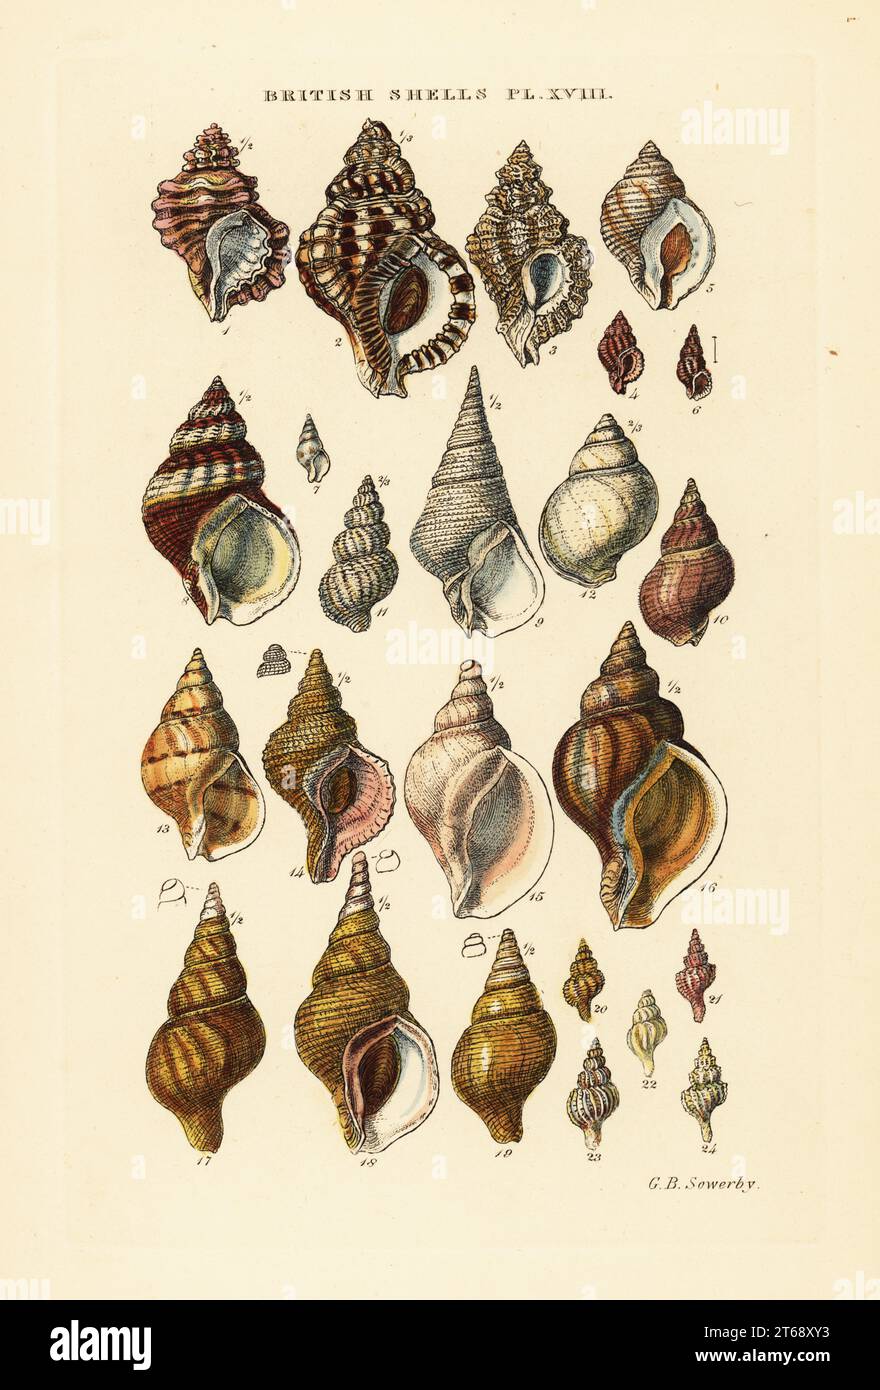 Triton shells, Ranella, rock snails, Murex, whelk, Bucchinum, Furus, Trophon, etc. Handcoloured copperplate engraving by George Brettingham Sowerby from his own Illustrated Index of British Shells, Sowerby and Simpkin, Marshall & Co., London, 1859. George Brettingham Sowerby II (1812-1884), British naturalist, illustrator, and conchologist. . Stock Photo